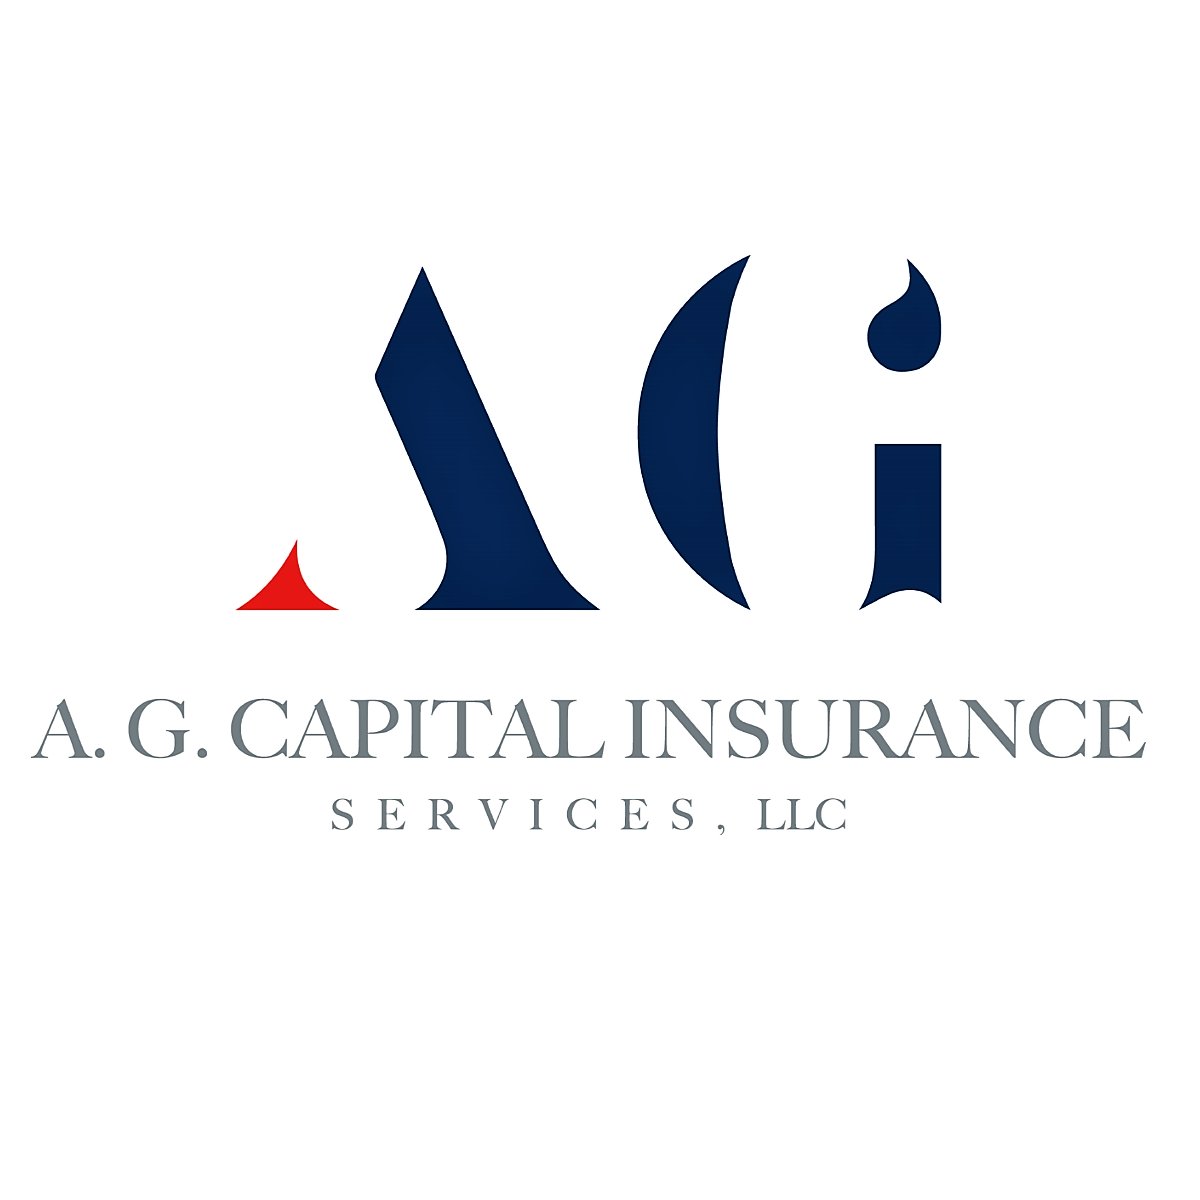 AGCI is a full-service insurance marketing & sales organization in the Senior, Retirement, Life, and Health Insurance markets.